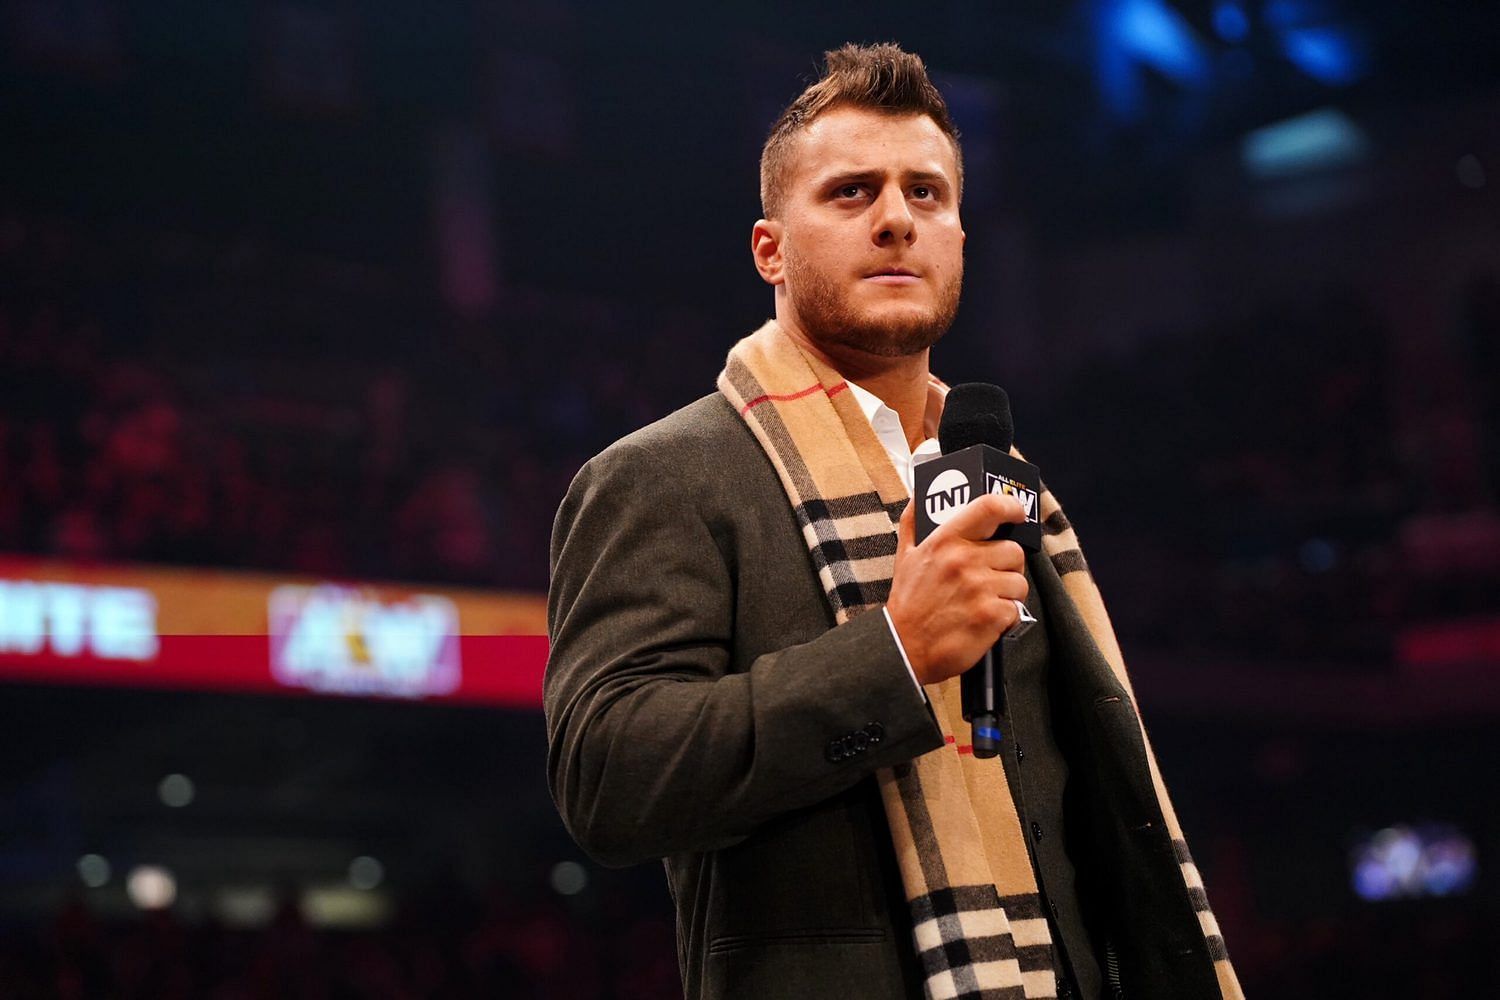 MJF has become one of the biggest names in wrestling today!